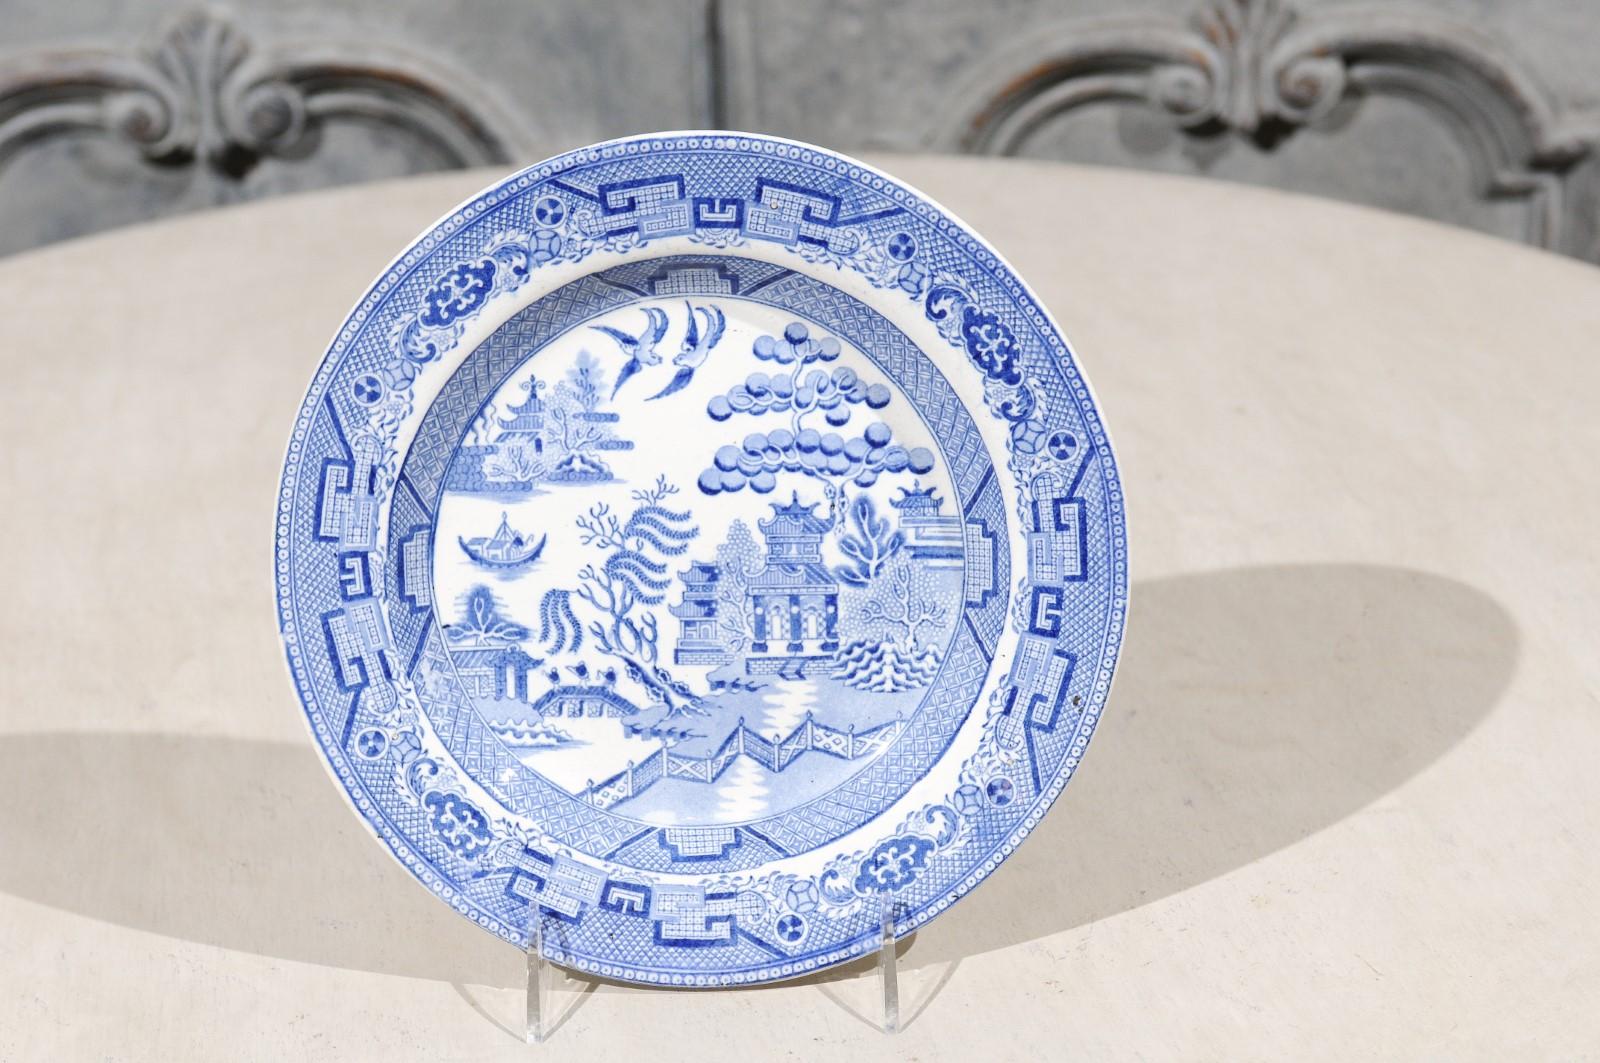 An English Wedgwood & Co. blue and white stoneware plate from the late 19th century, with willow pattern. Born in the Staffordshire County during the later years of the 19th century, this Wedgwood & Co. stoneware plate features an exquisite